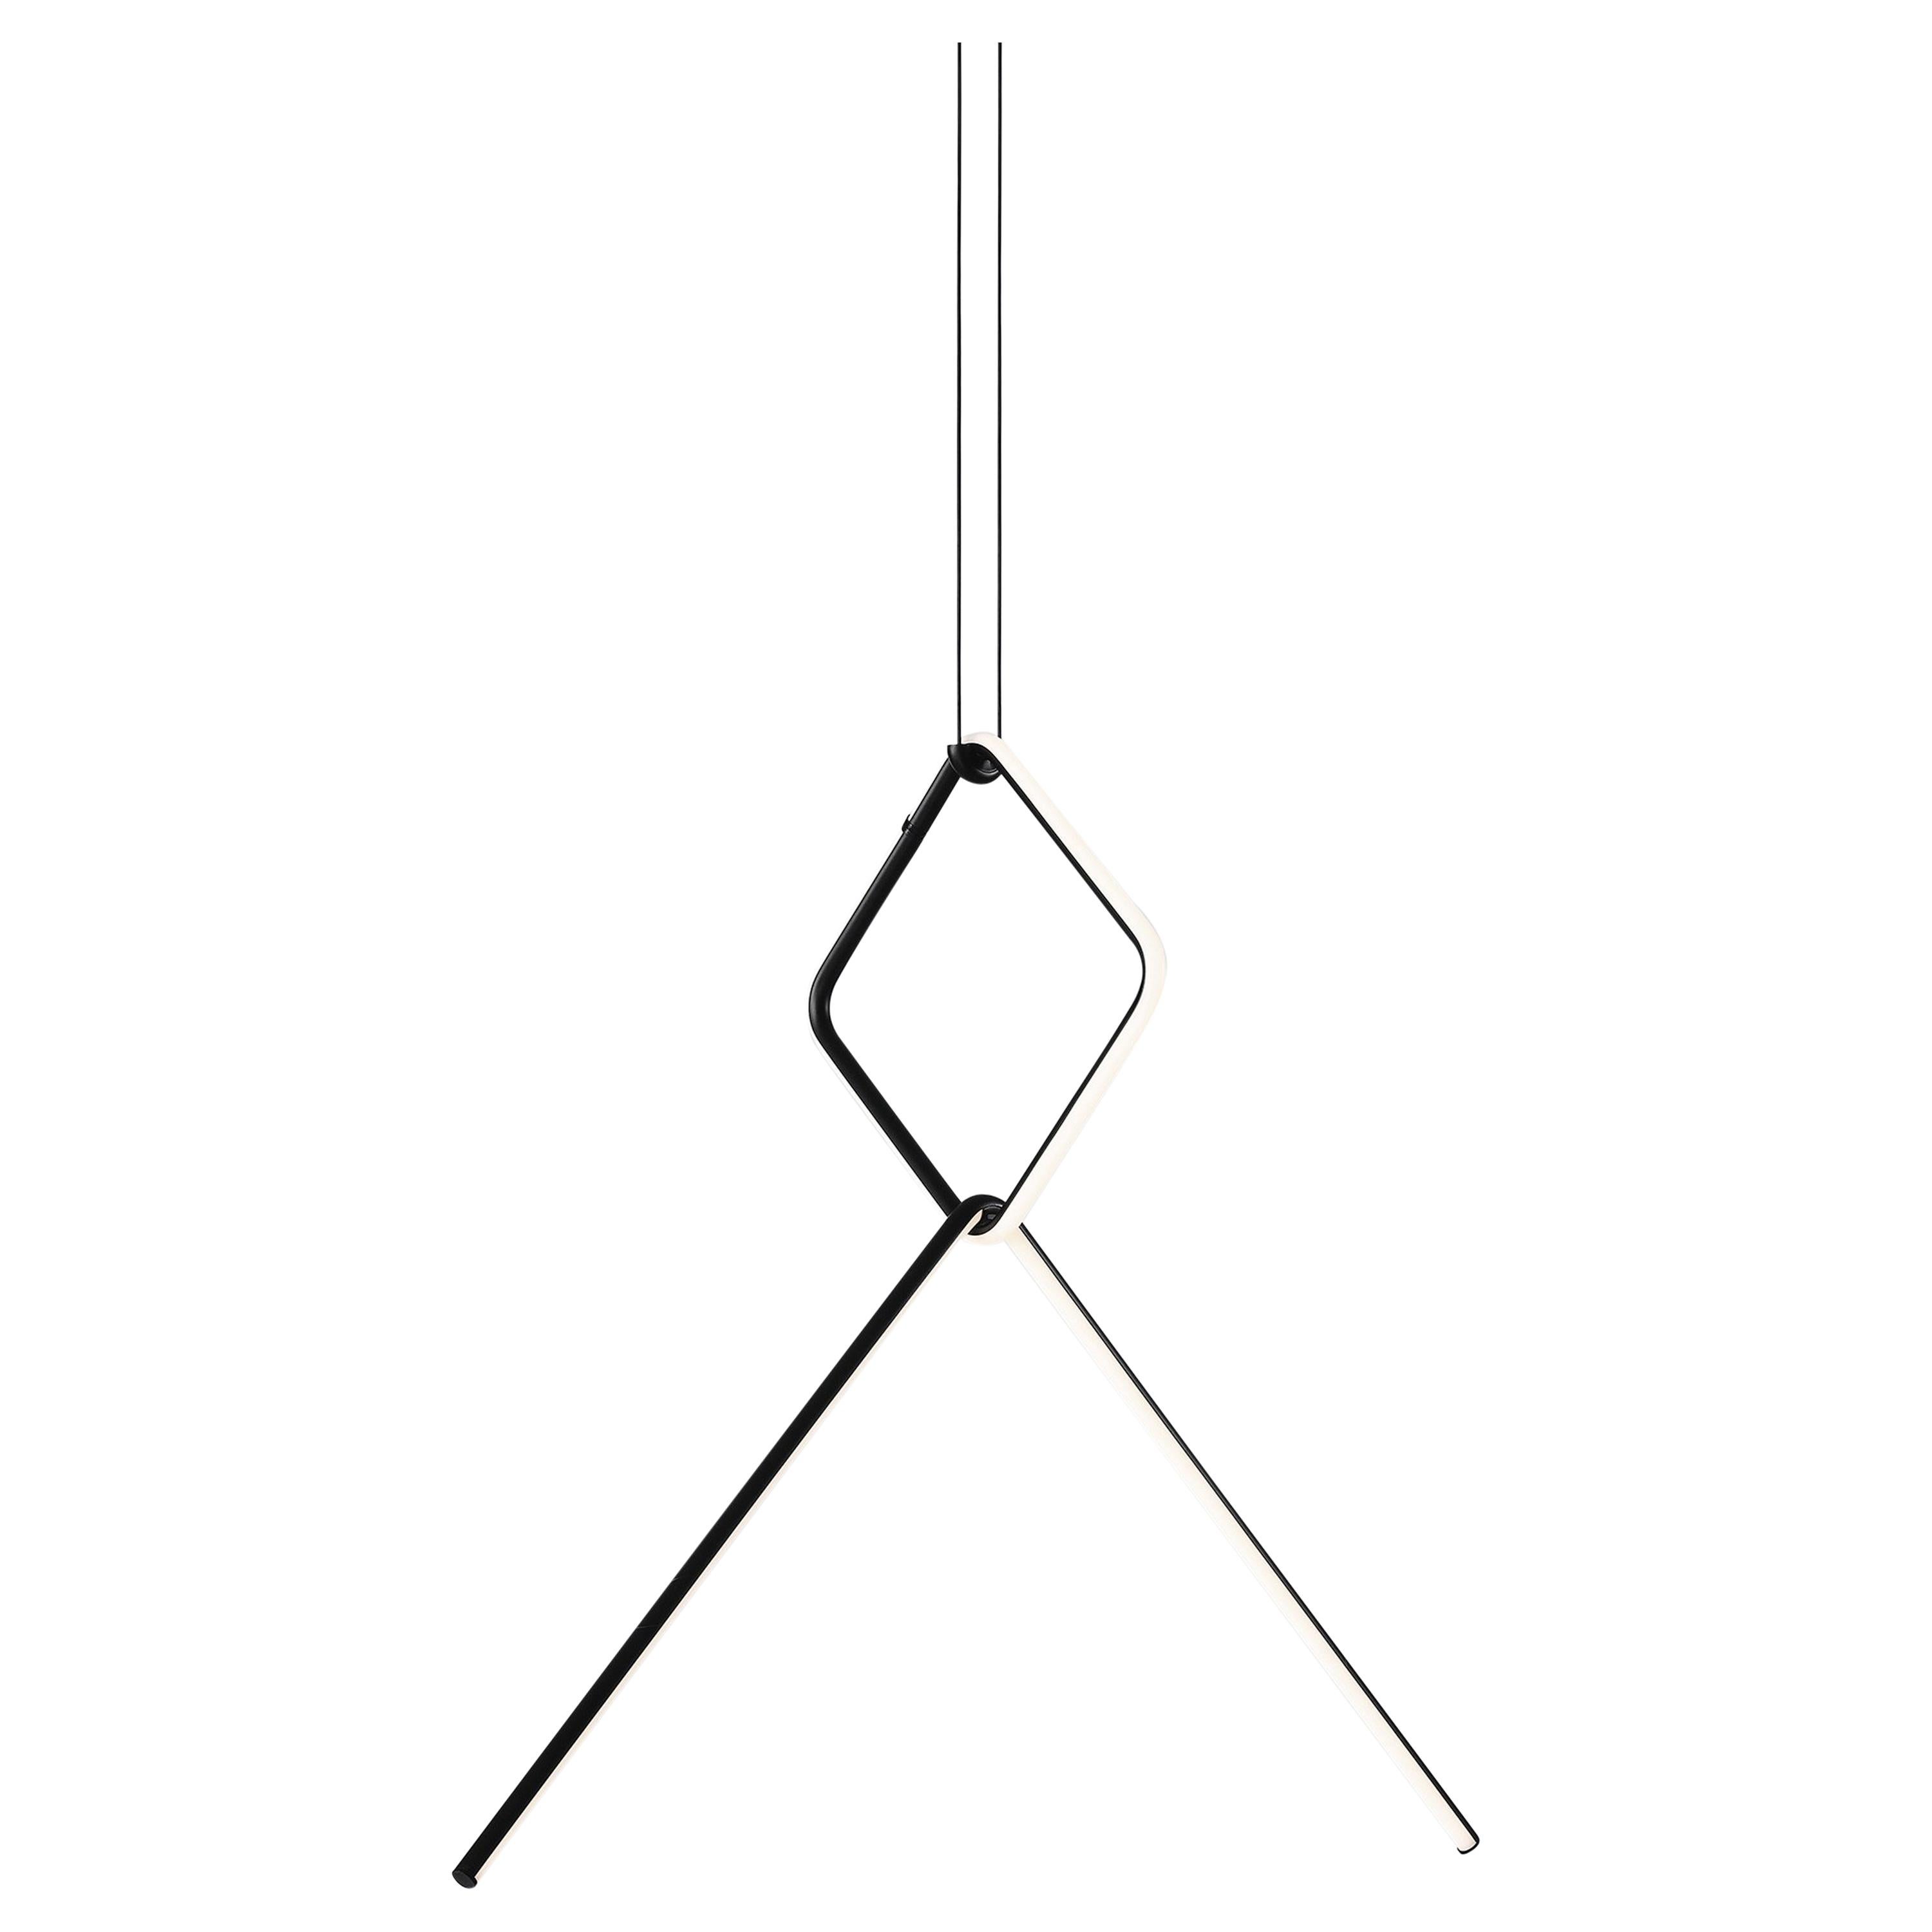 FLOS Small Square and Broken Line Arrangements Light by Michael Anastassiades